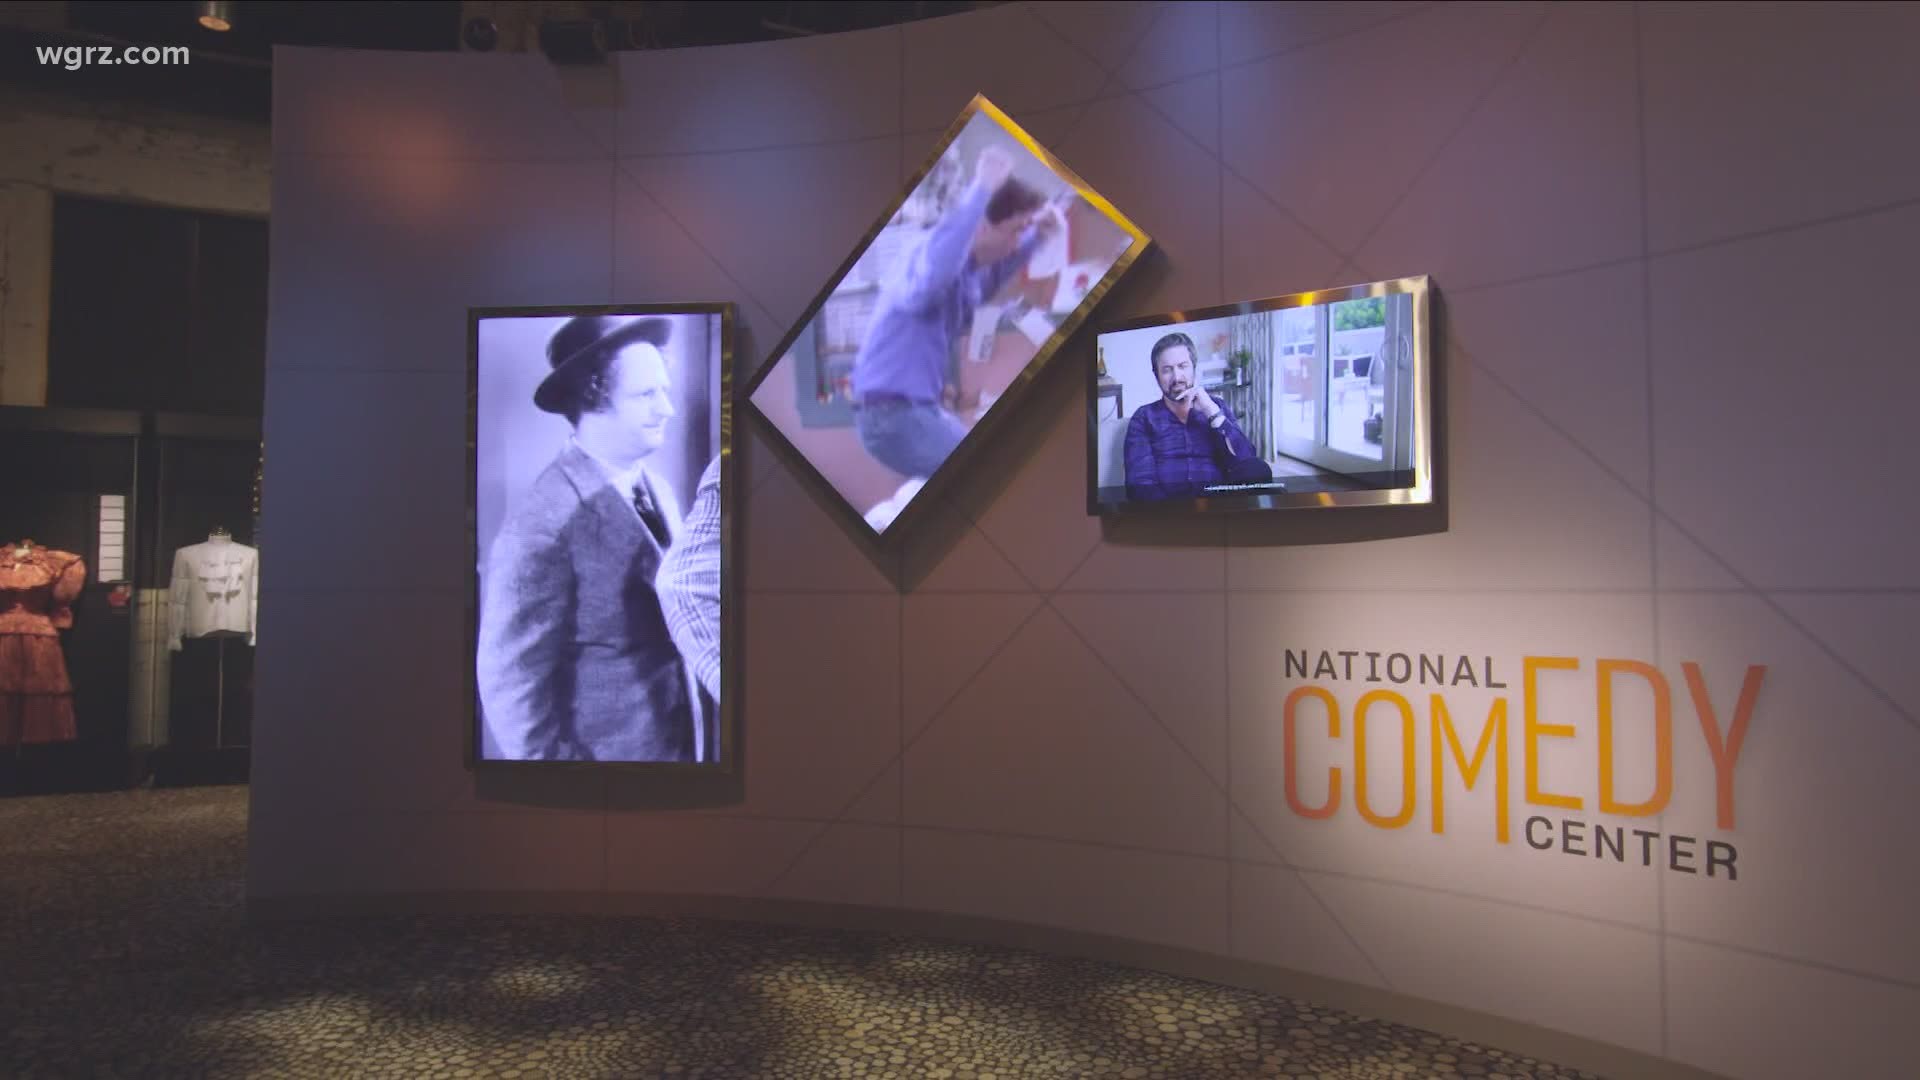 The National Comedy Center in Jamestown made the announcement on Thursday.